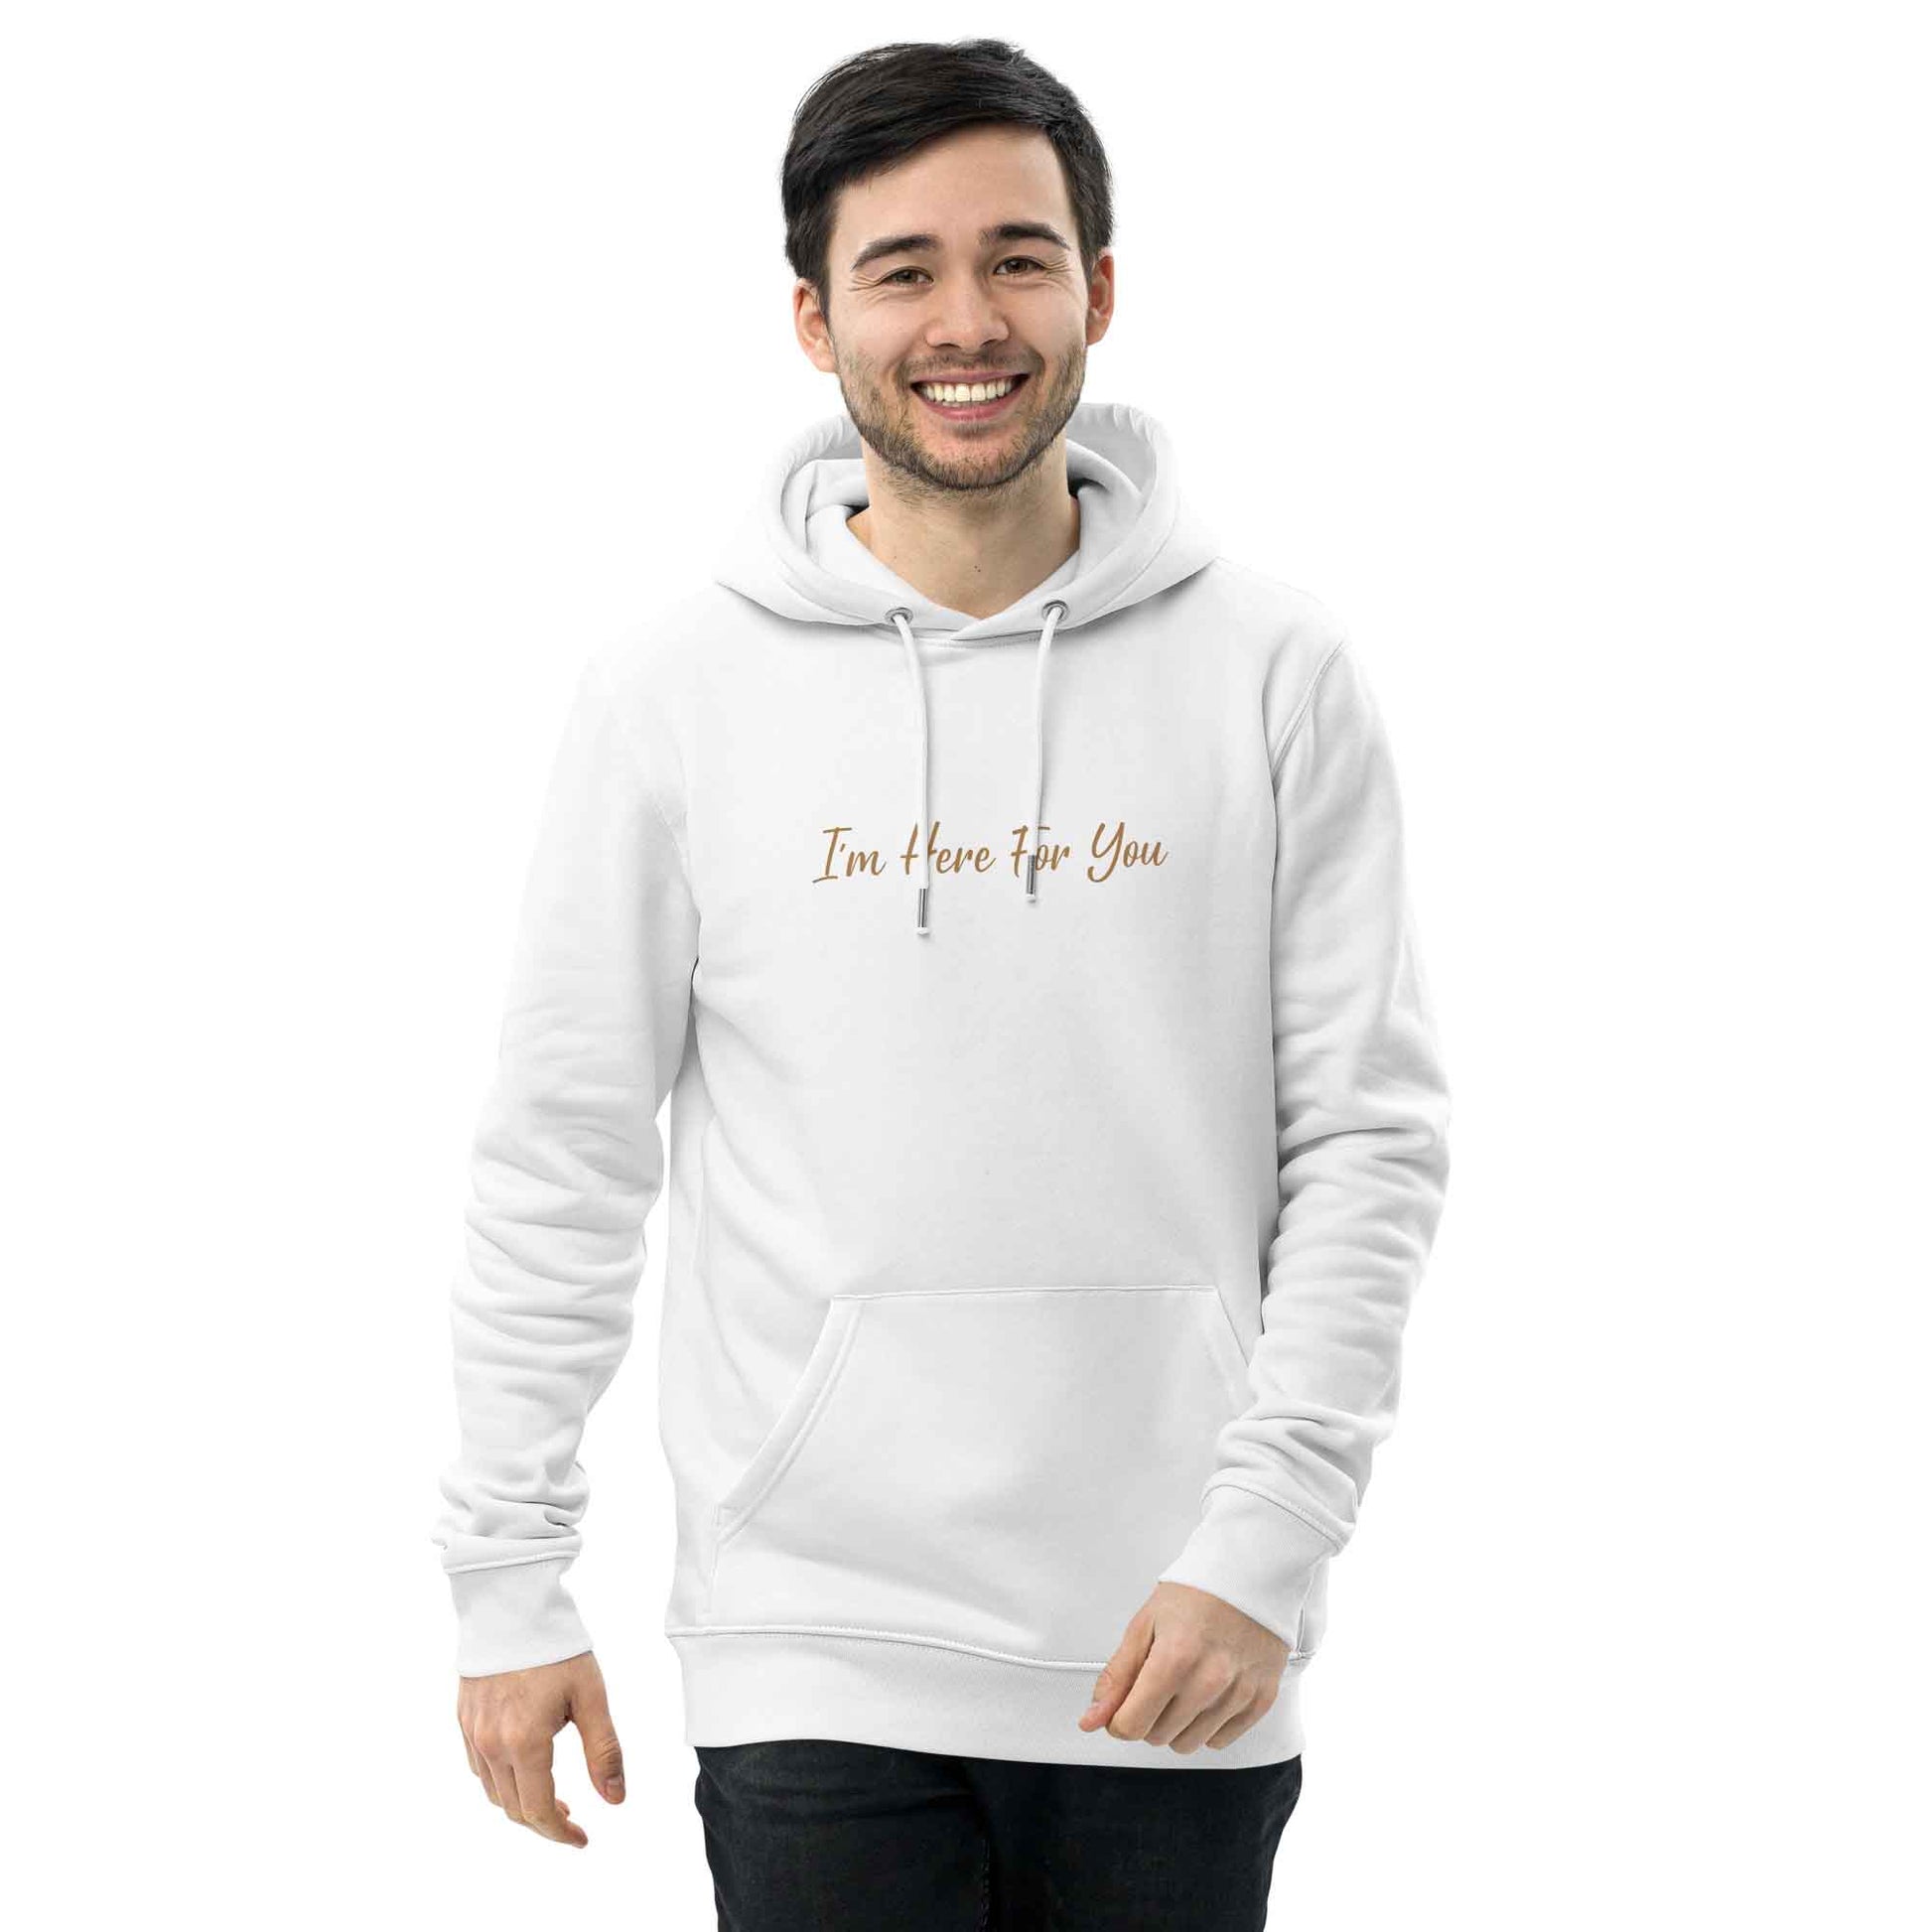 Men white organic cotton hoodie with inspirational quote, "I'm Here For You."